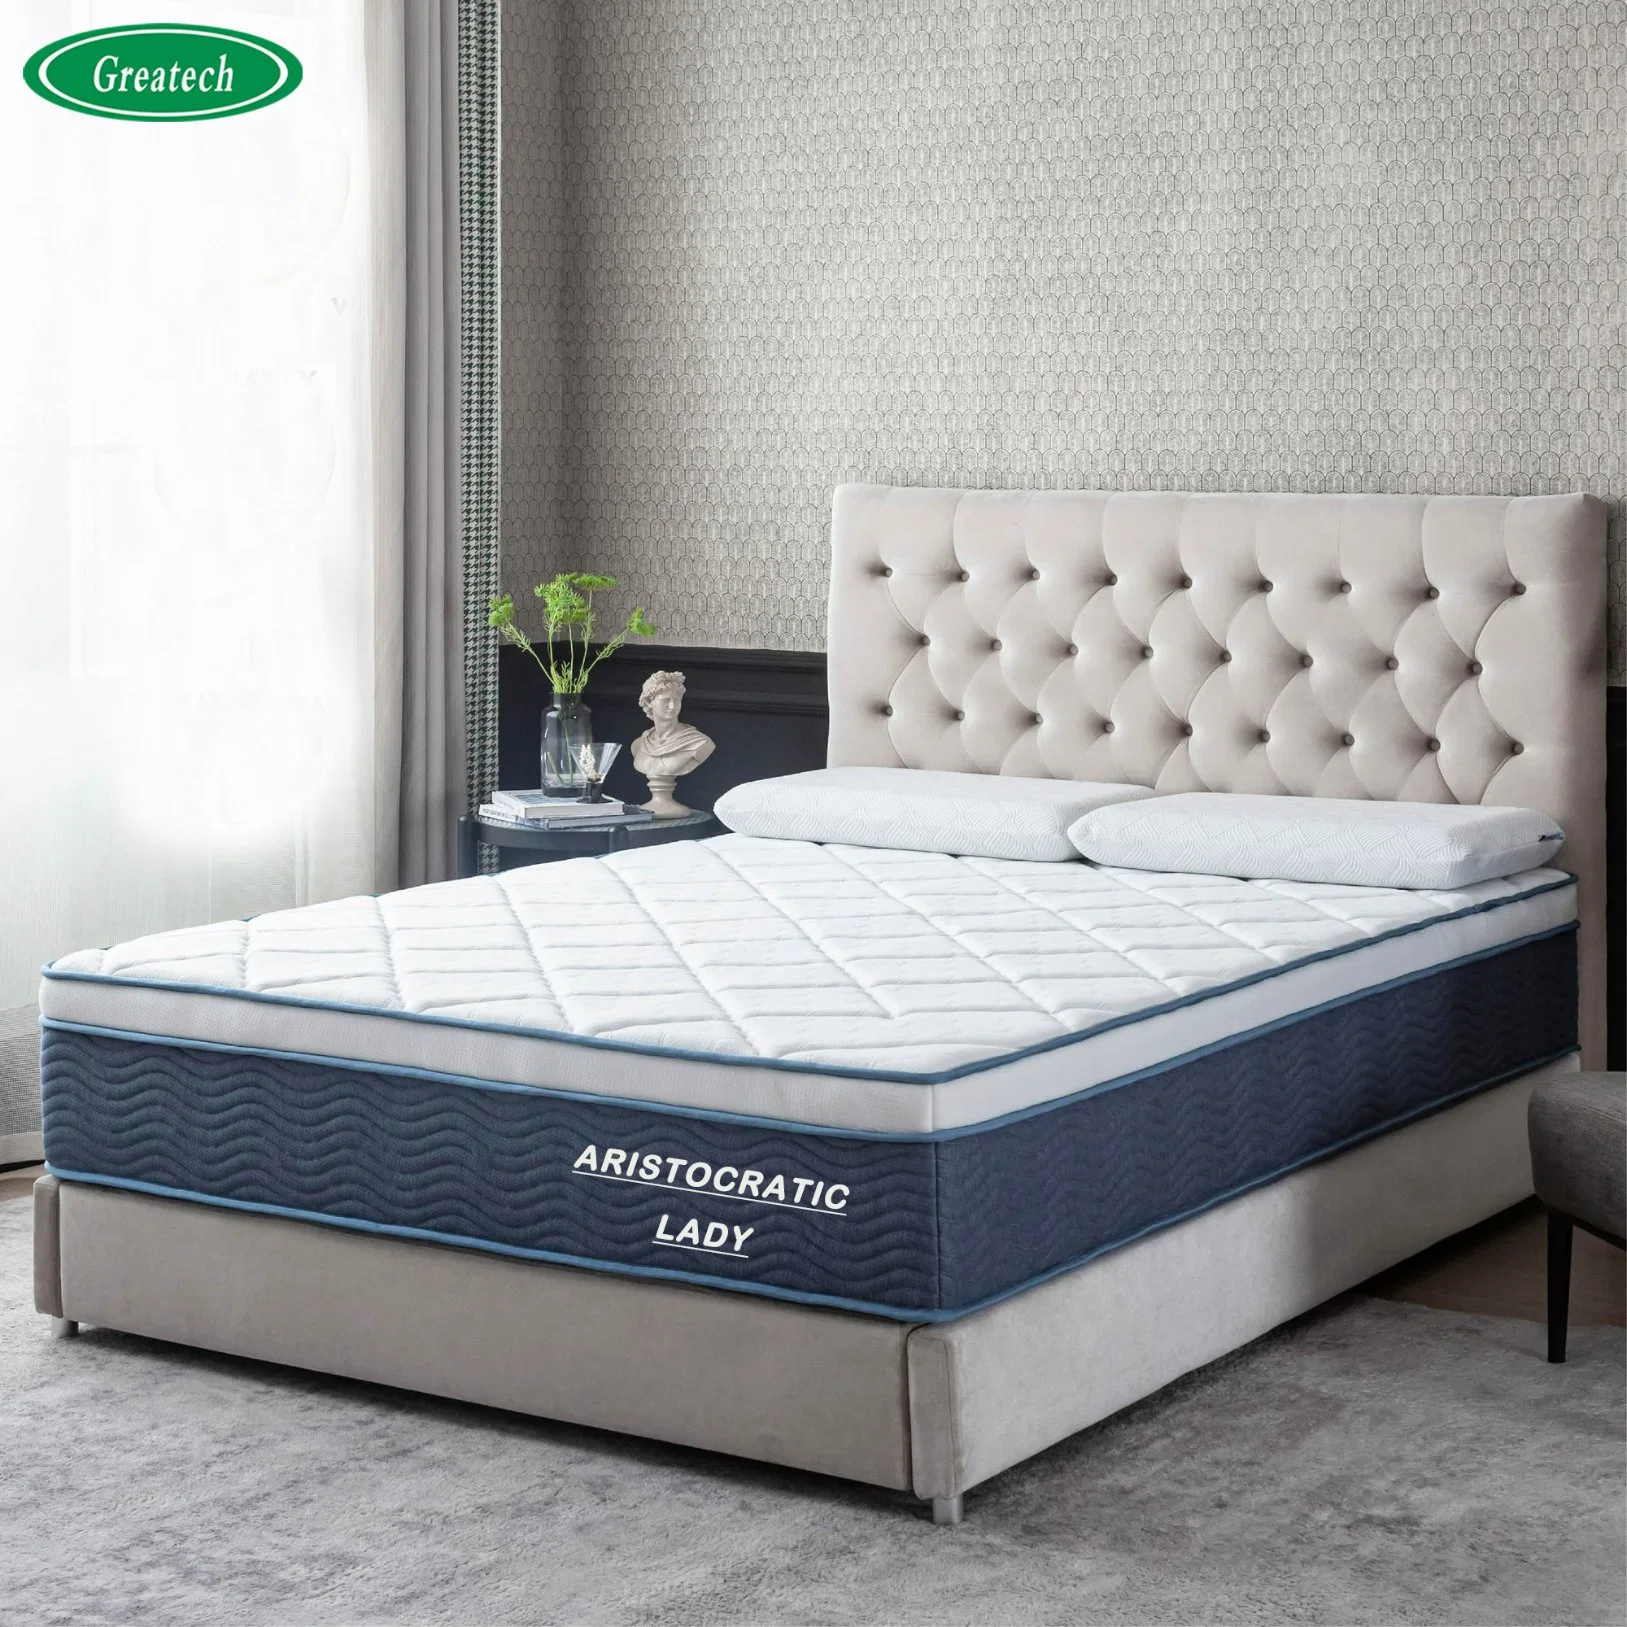 Full Size China Wholesale/Supplier Cheap Bed Mattress Living Room Furnture Bedroom Furniture Cotton Bamboo Fabric Vacuum Packing Spring Mattress in a Box